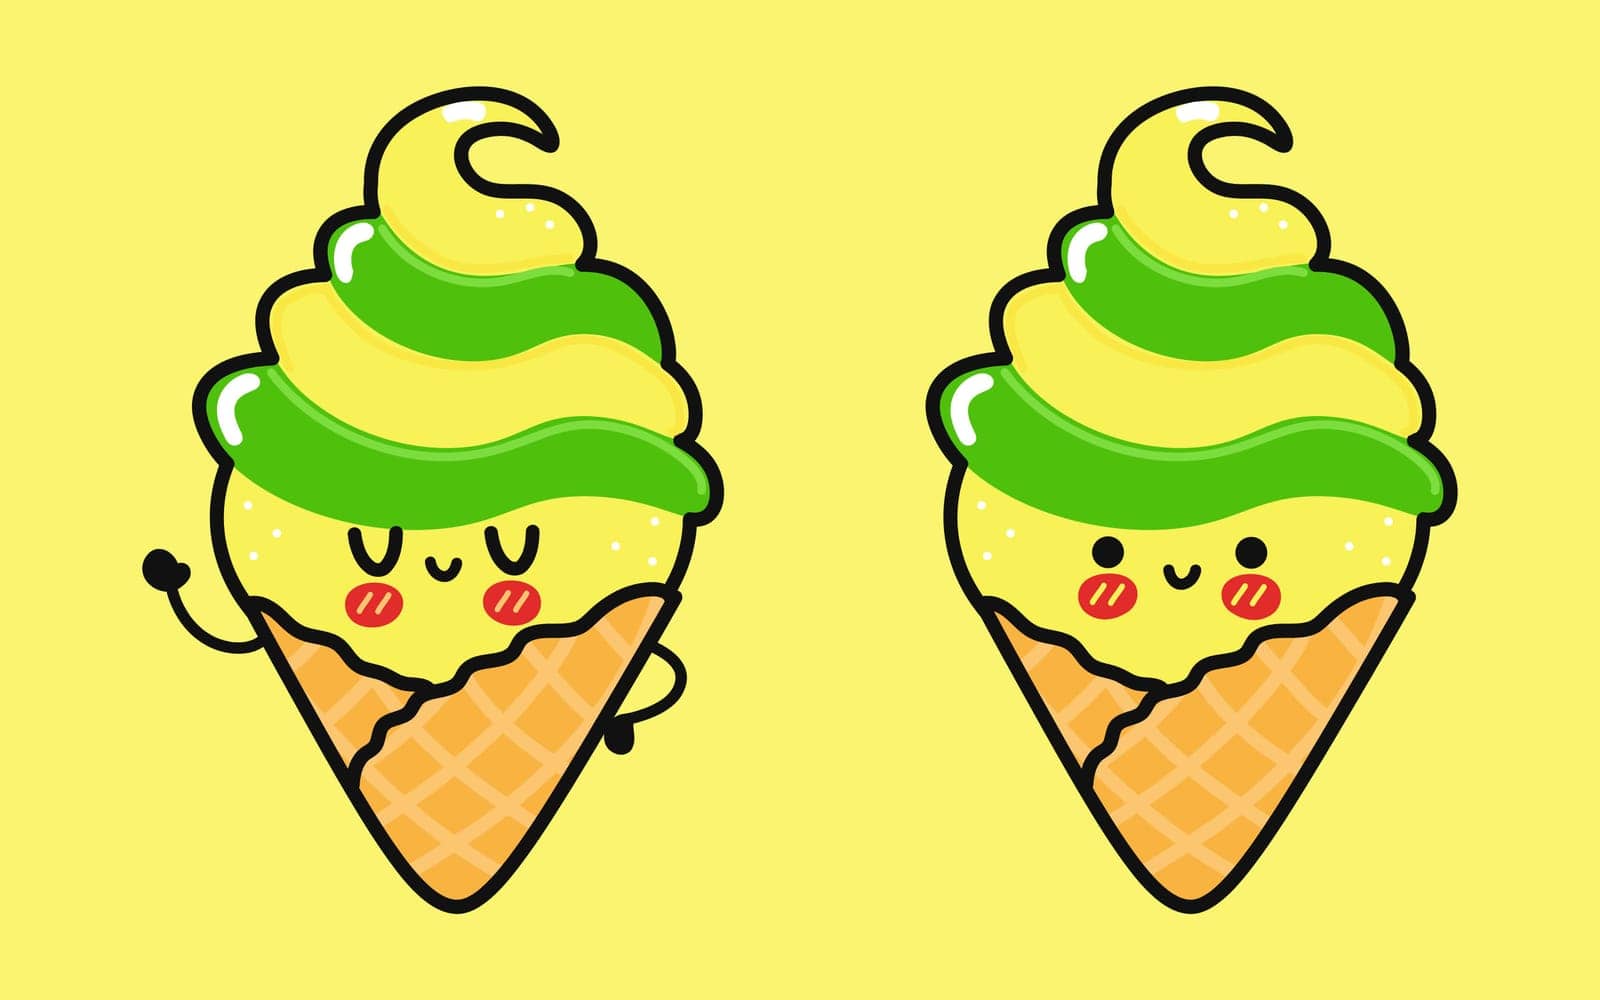 Cute funny Ice cream. Vector hand drawn cartoon kawaii character illustration icon. Isolated on yellow background. Ice cream character concept by Caspian